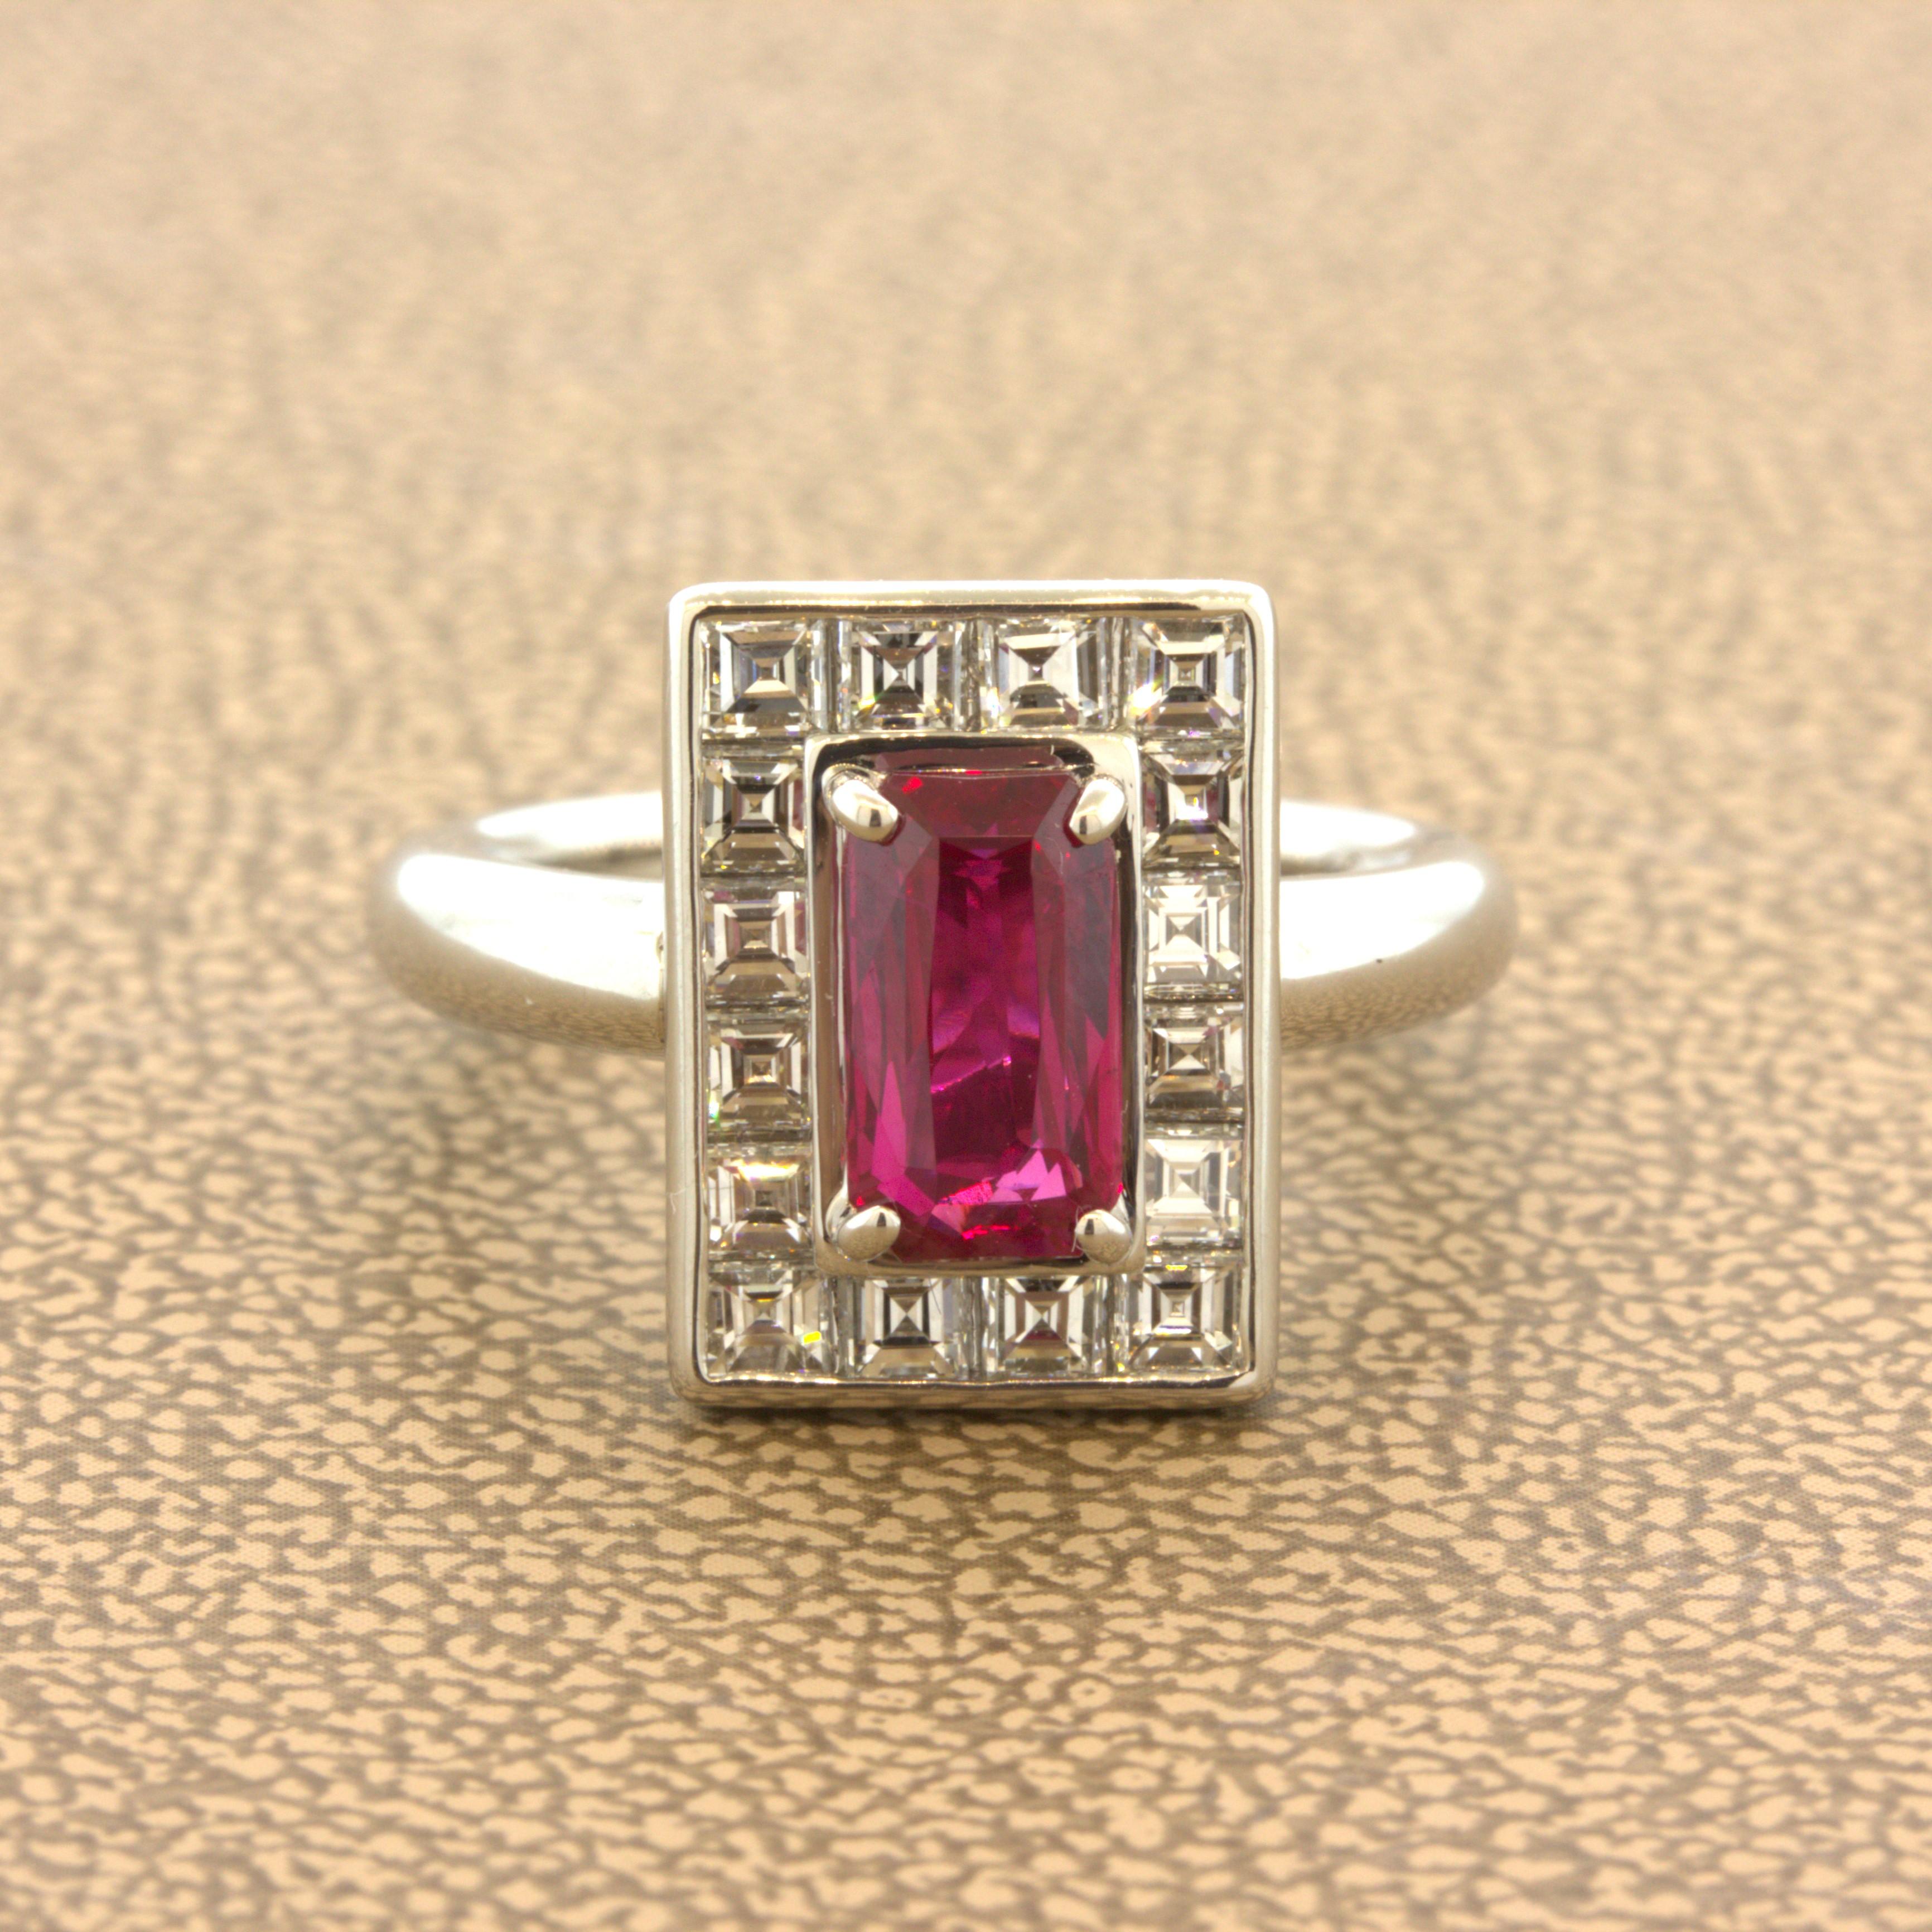 A super piece featuring a very fine natural Burmese ruby certified by the GIA. It weighs 1.50 carats and has a unique emerald-cut shape with brilliant faceting giving it more brilliance and light return than a typical emerald-cut. Additionally, it